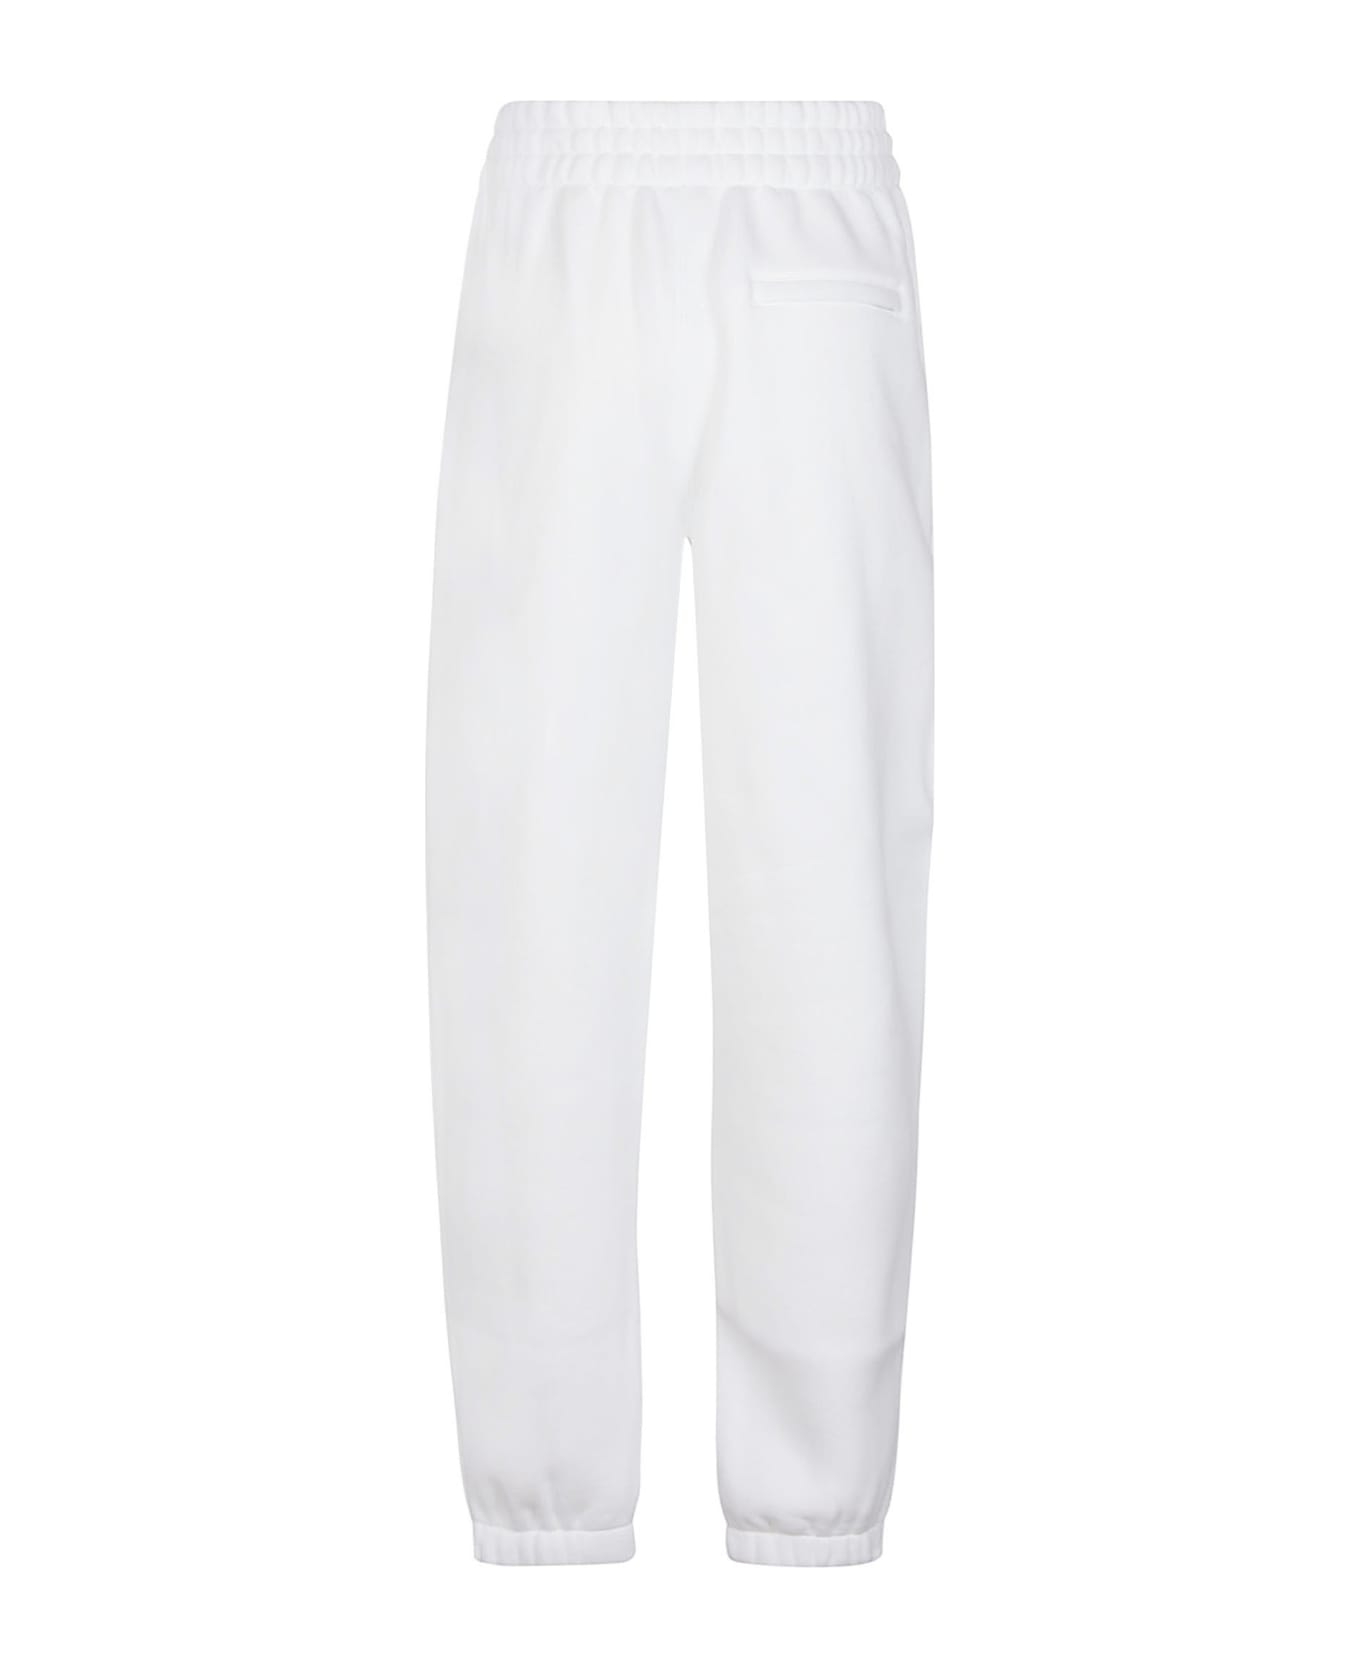 T by Alexander Wang Puff Paint Logo Esential Terry Classic Sweatpant - White スウェットパンツ